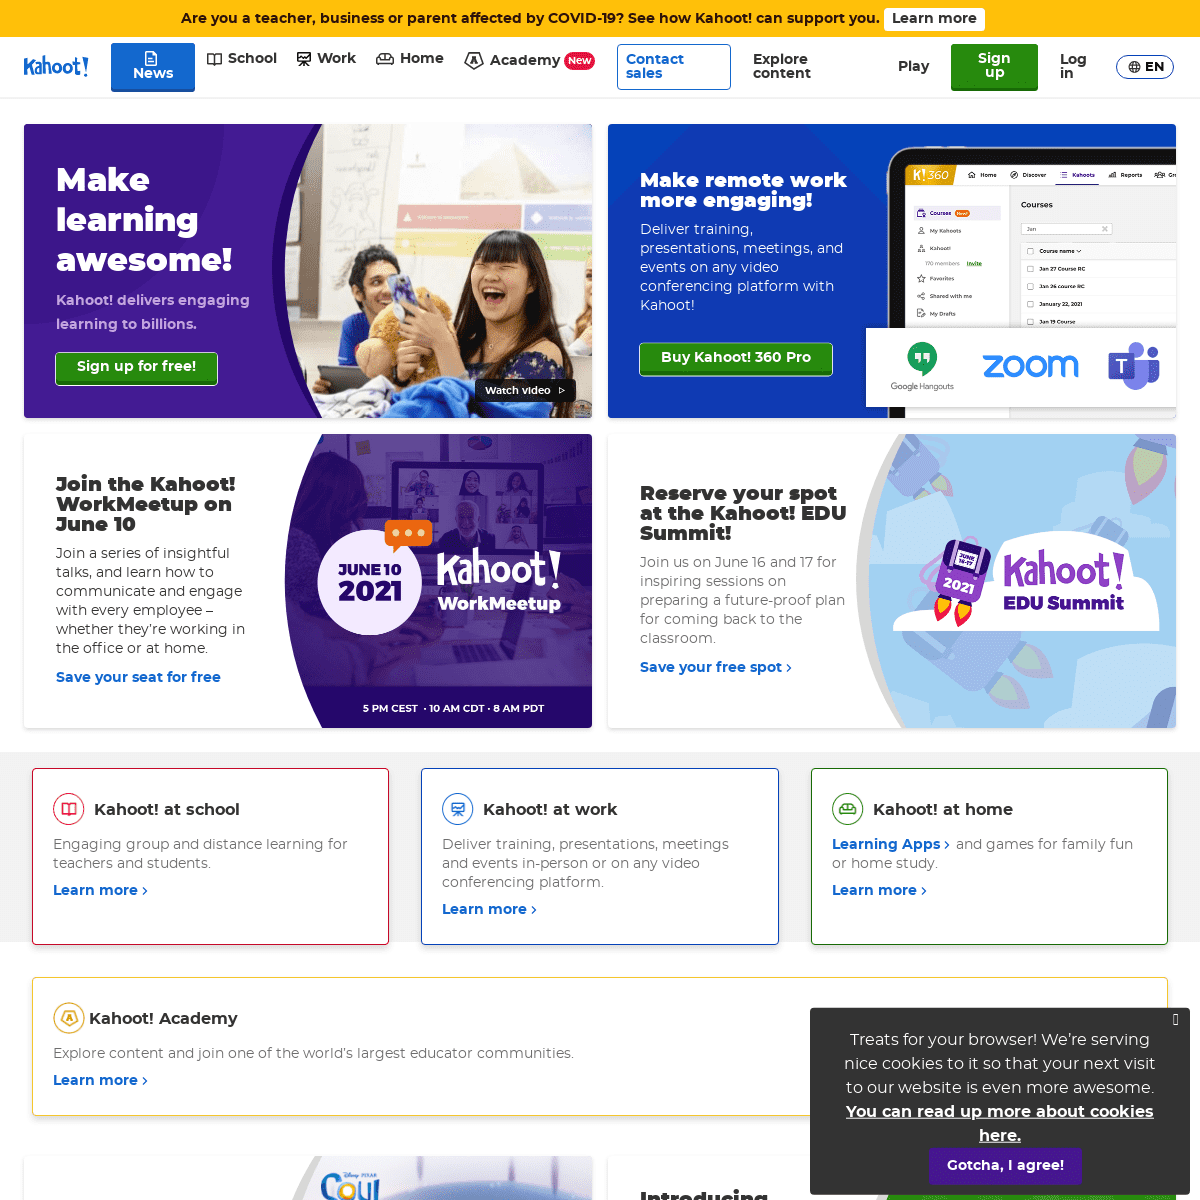 A complete backup of https://getkahoot.com